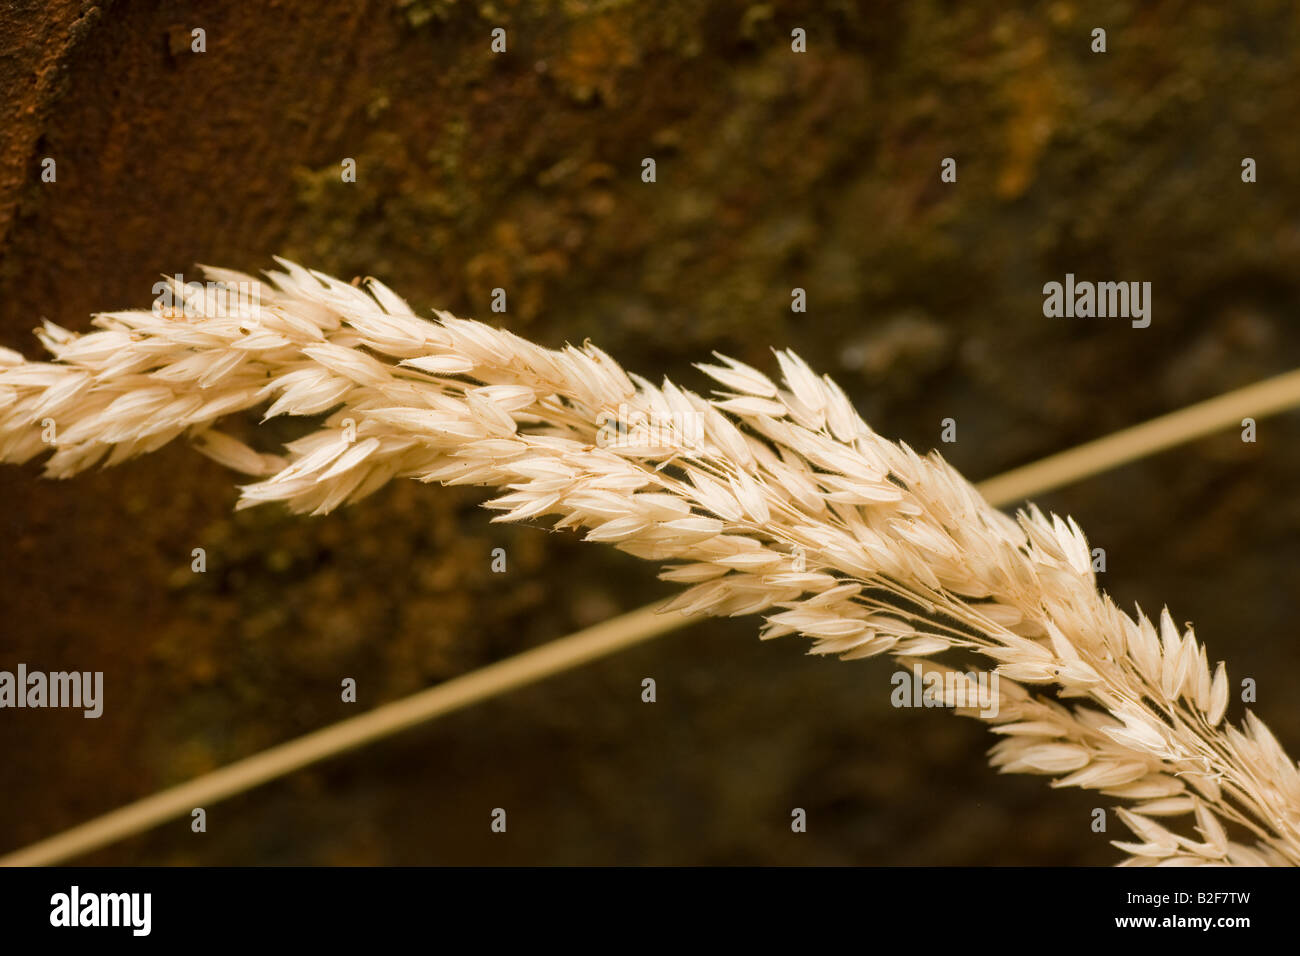 Oat with Rust Background Stock Photo